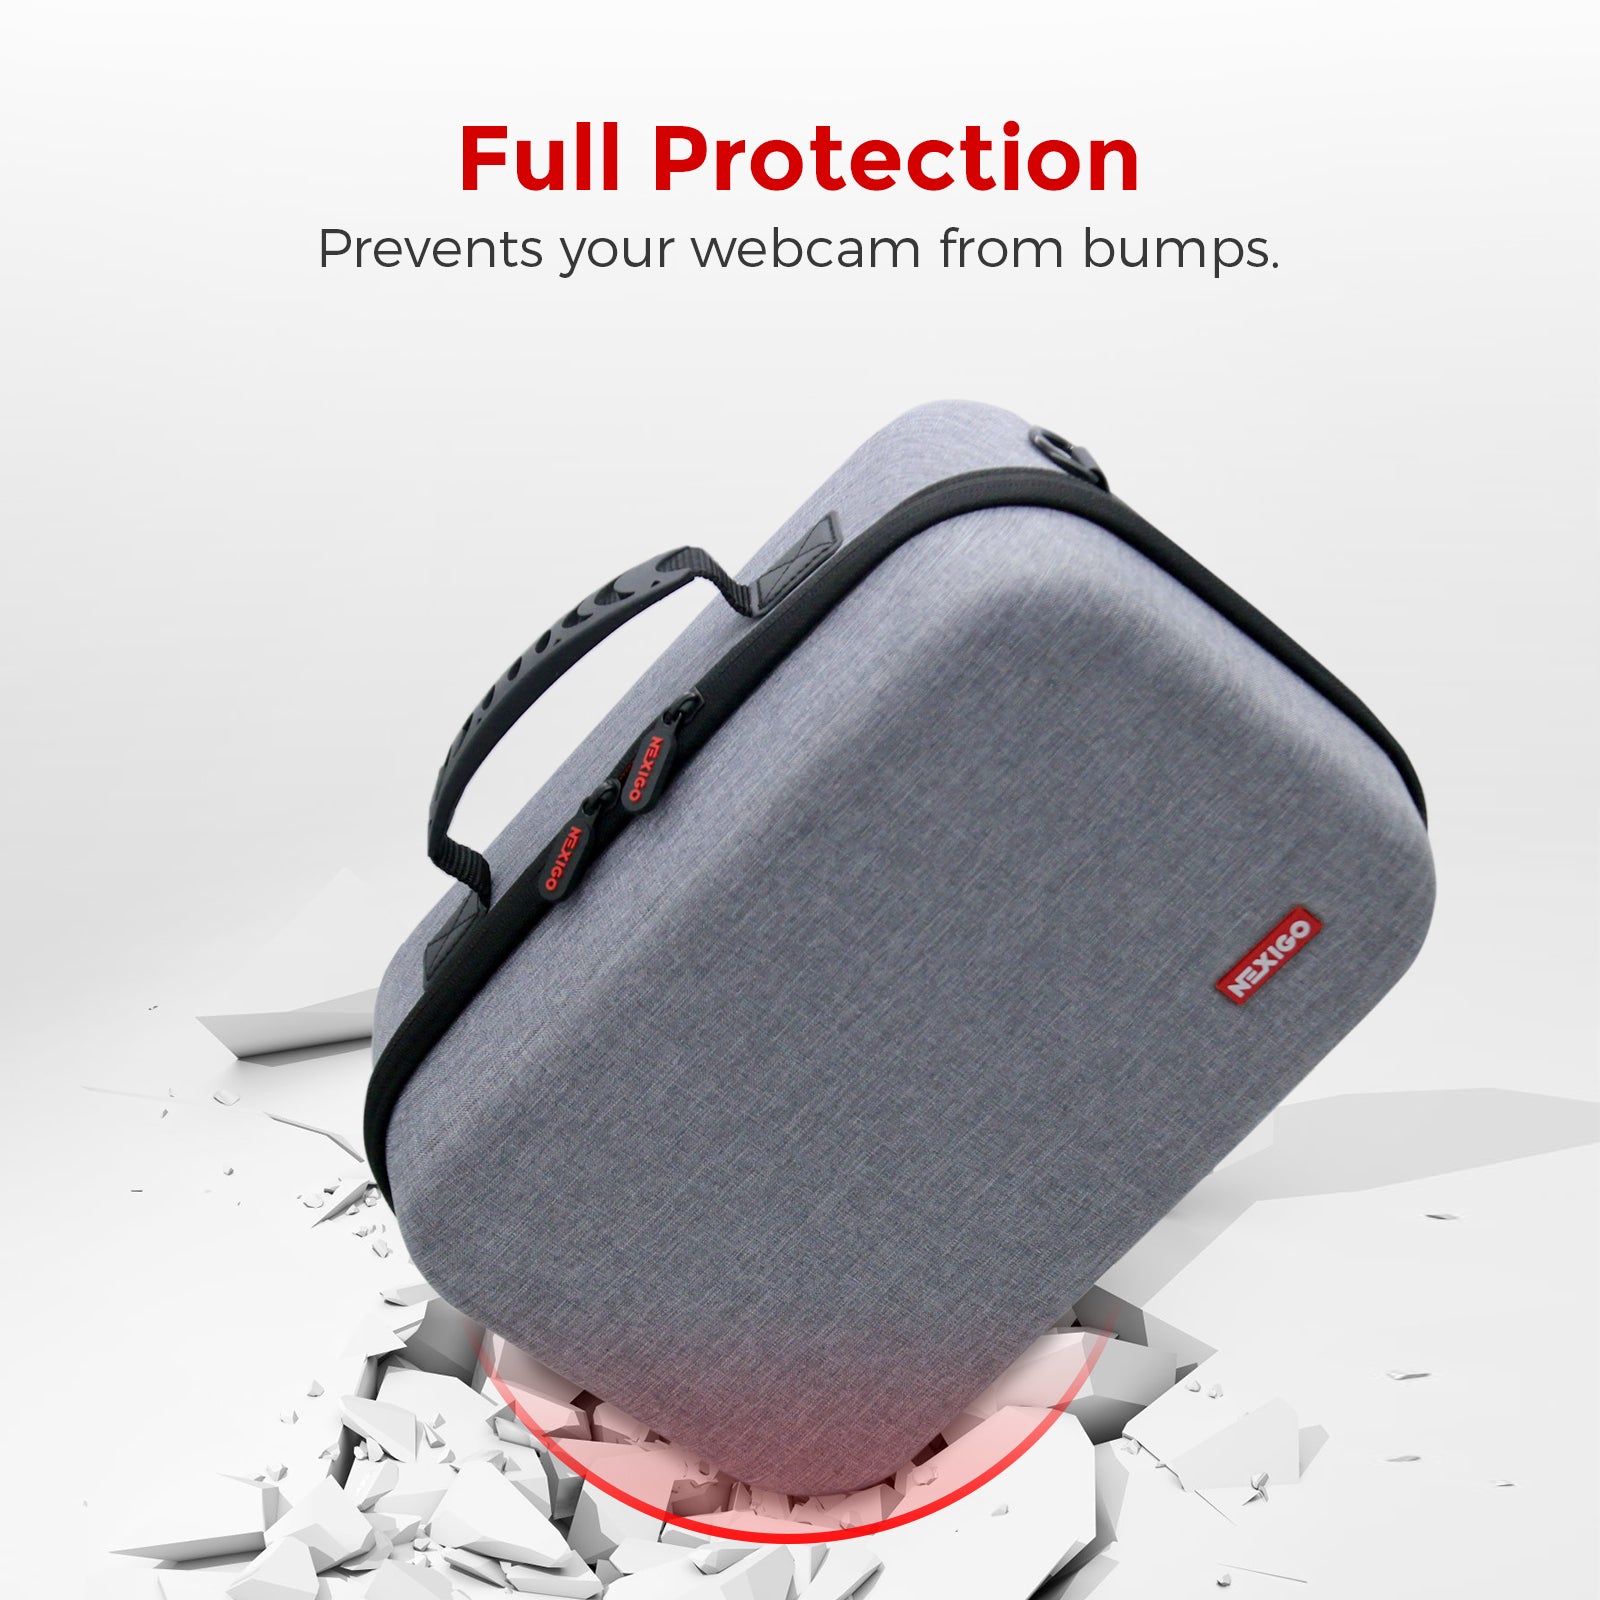 The travel case prevents your webcam from bumps. 